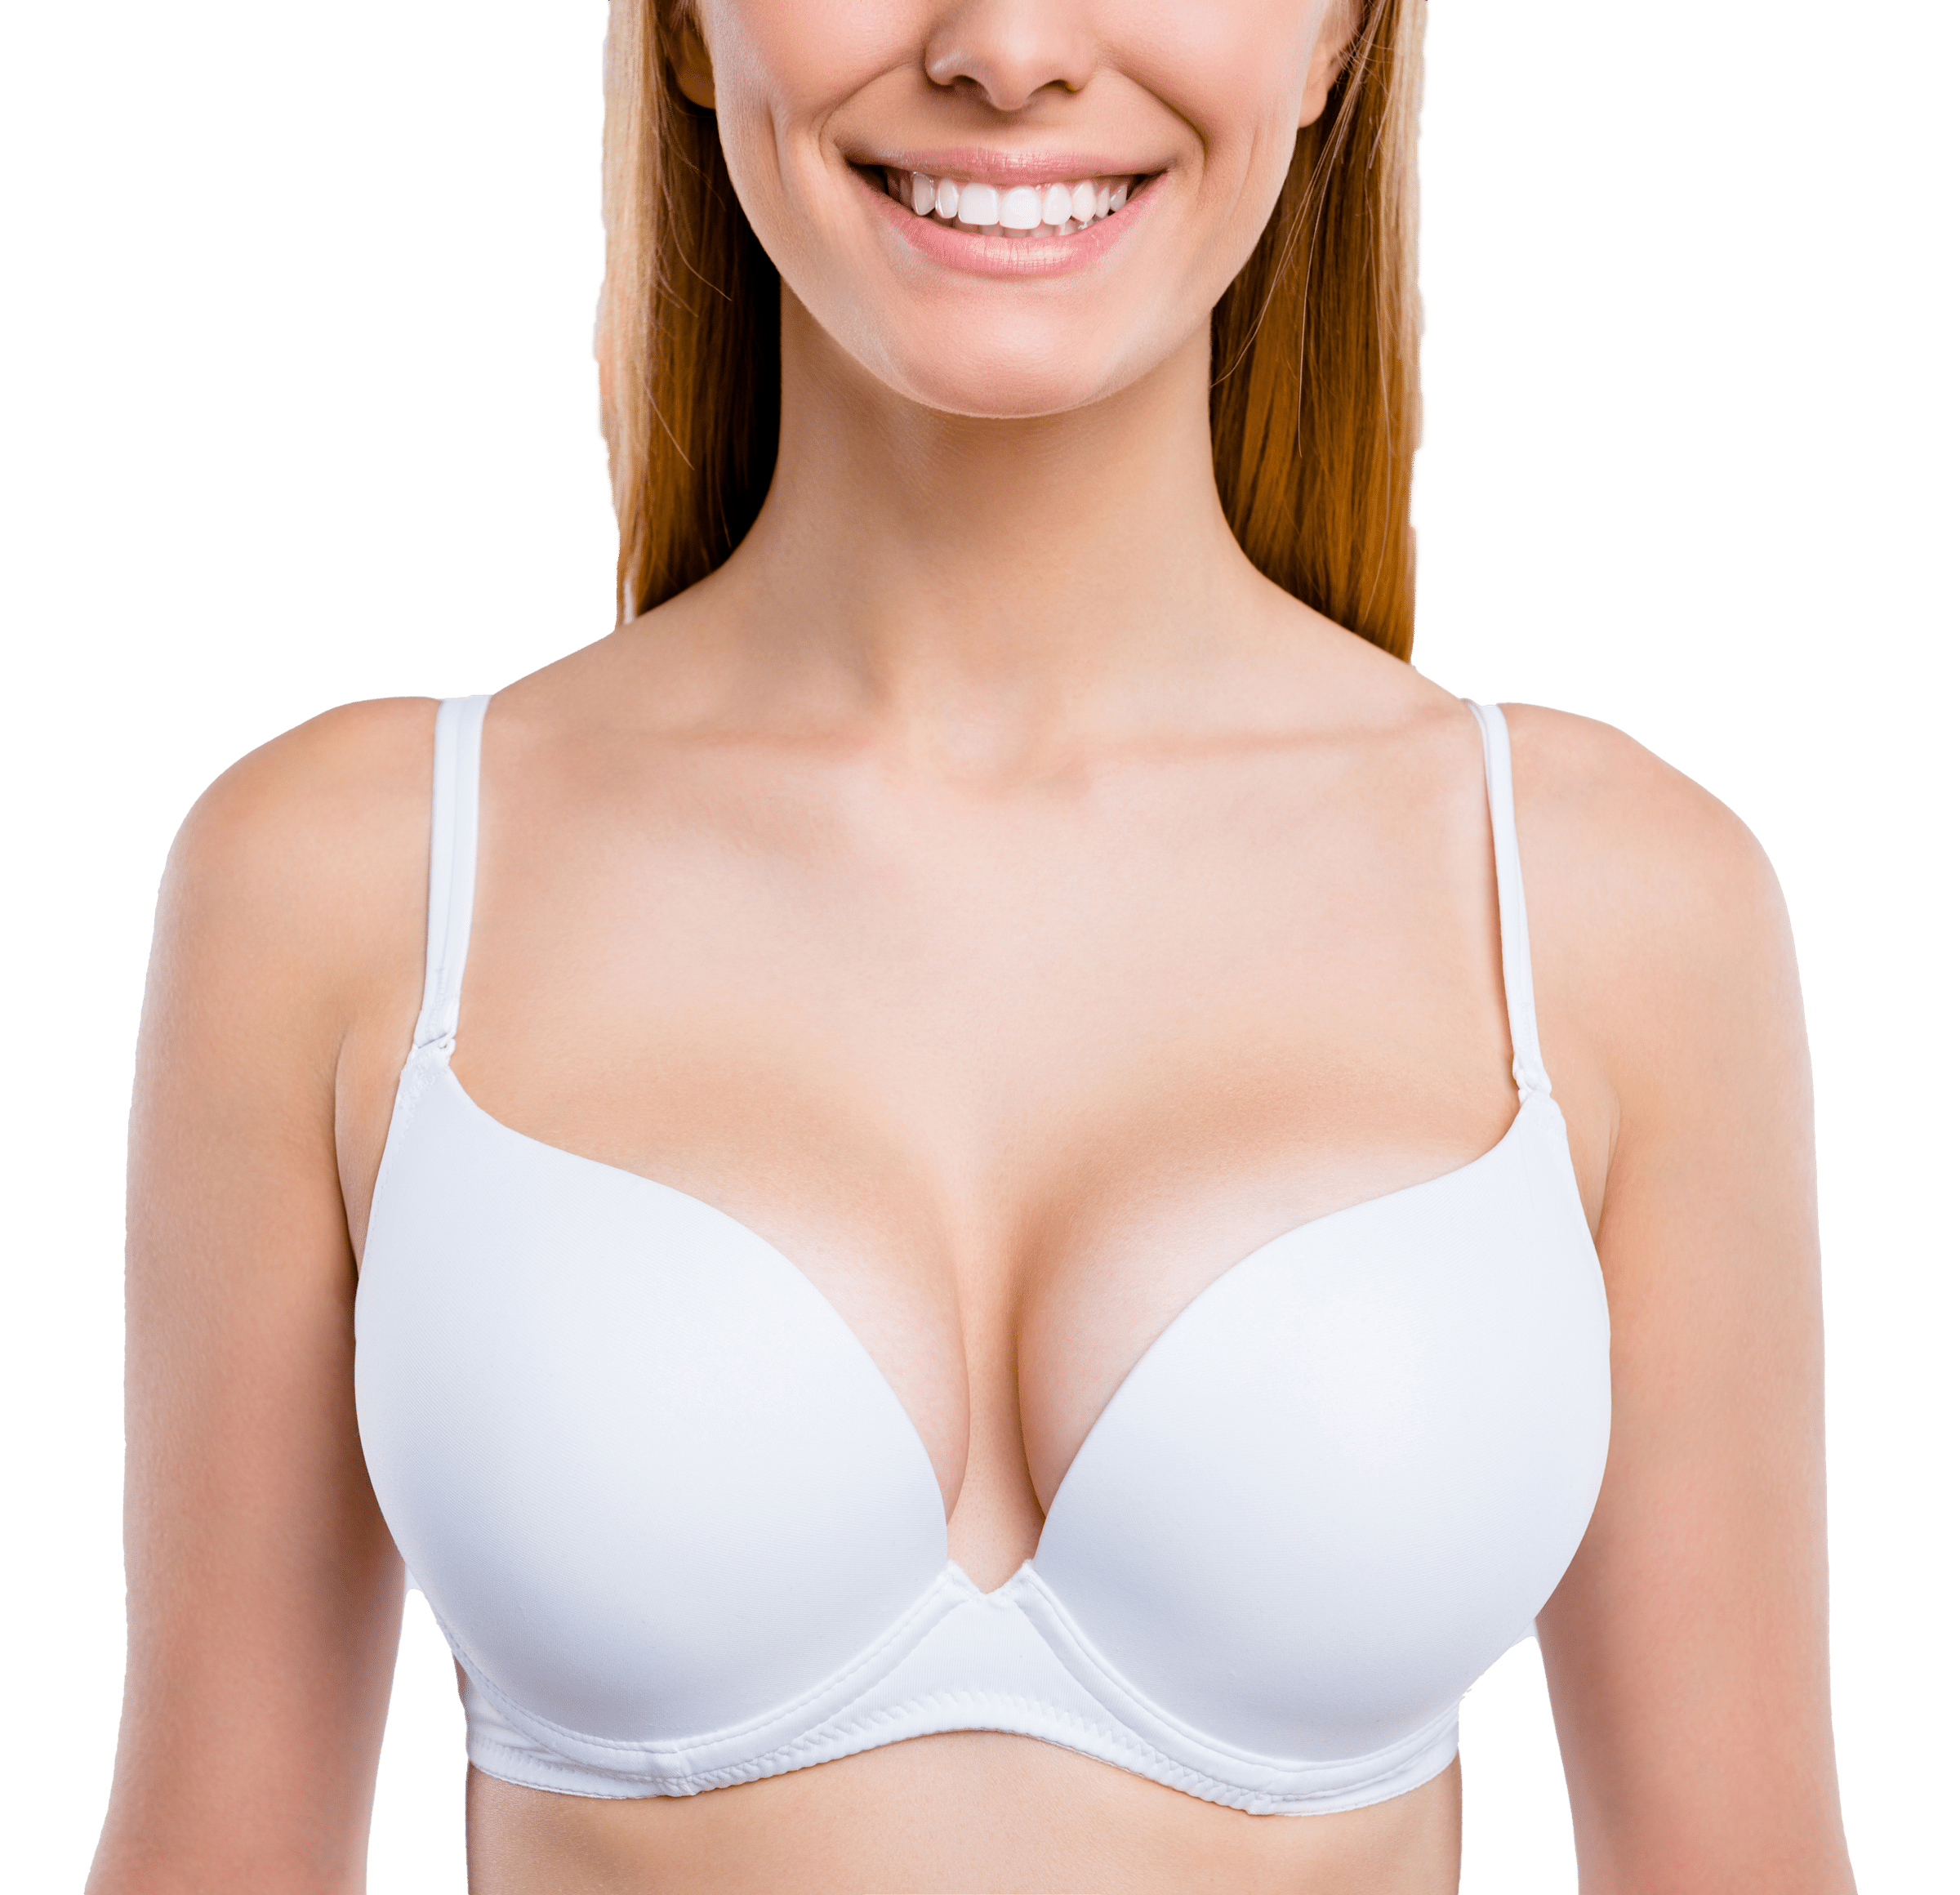 Types of women's Breasts. Women's Breast Icon, - Stock